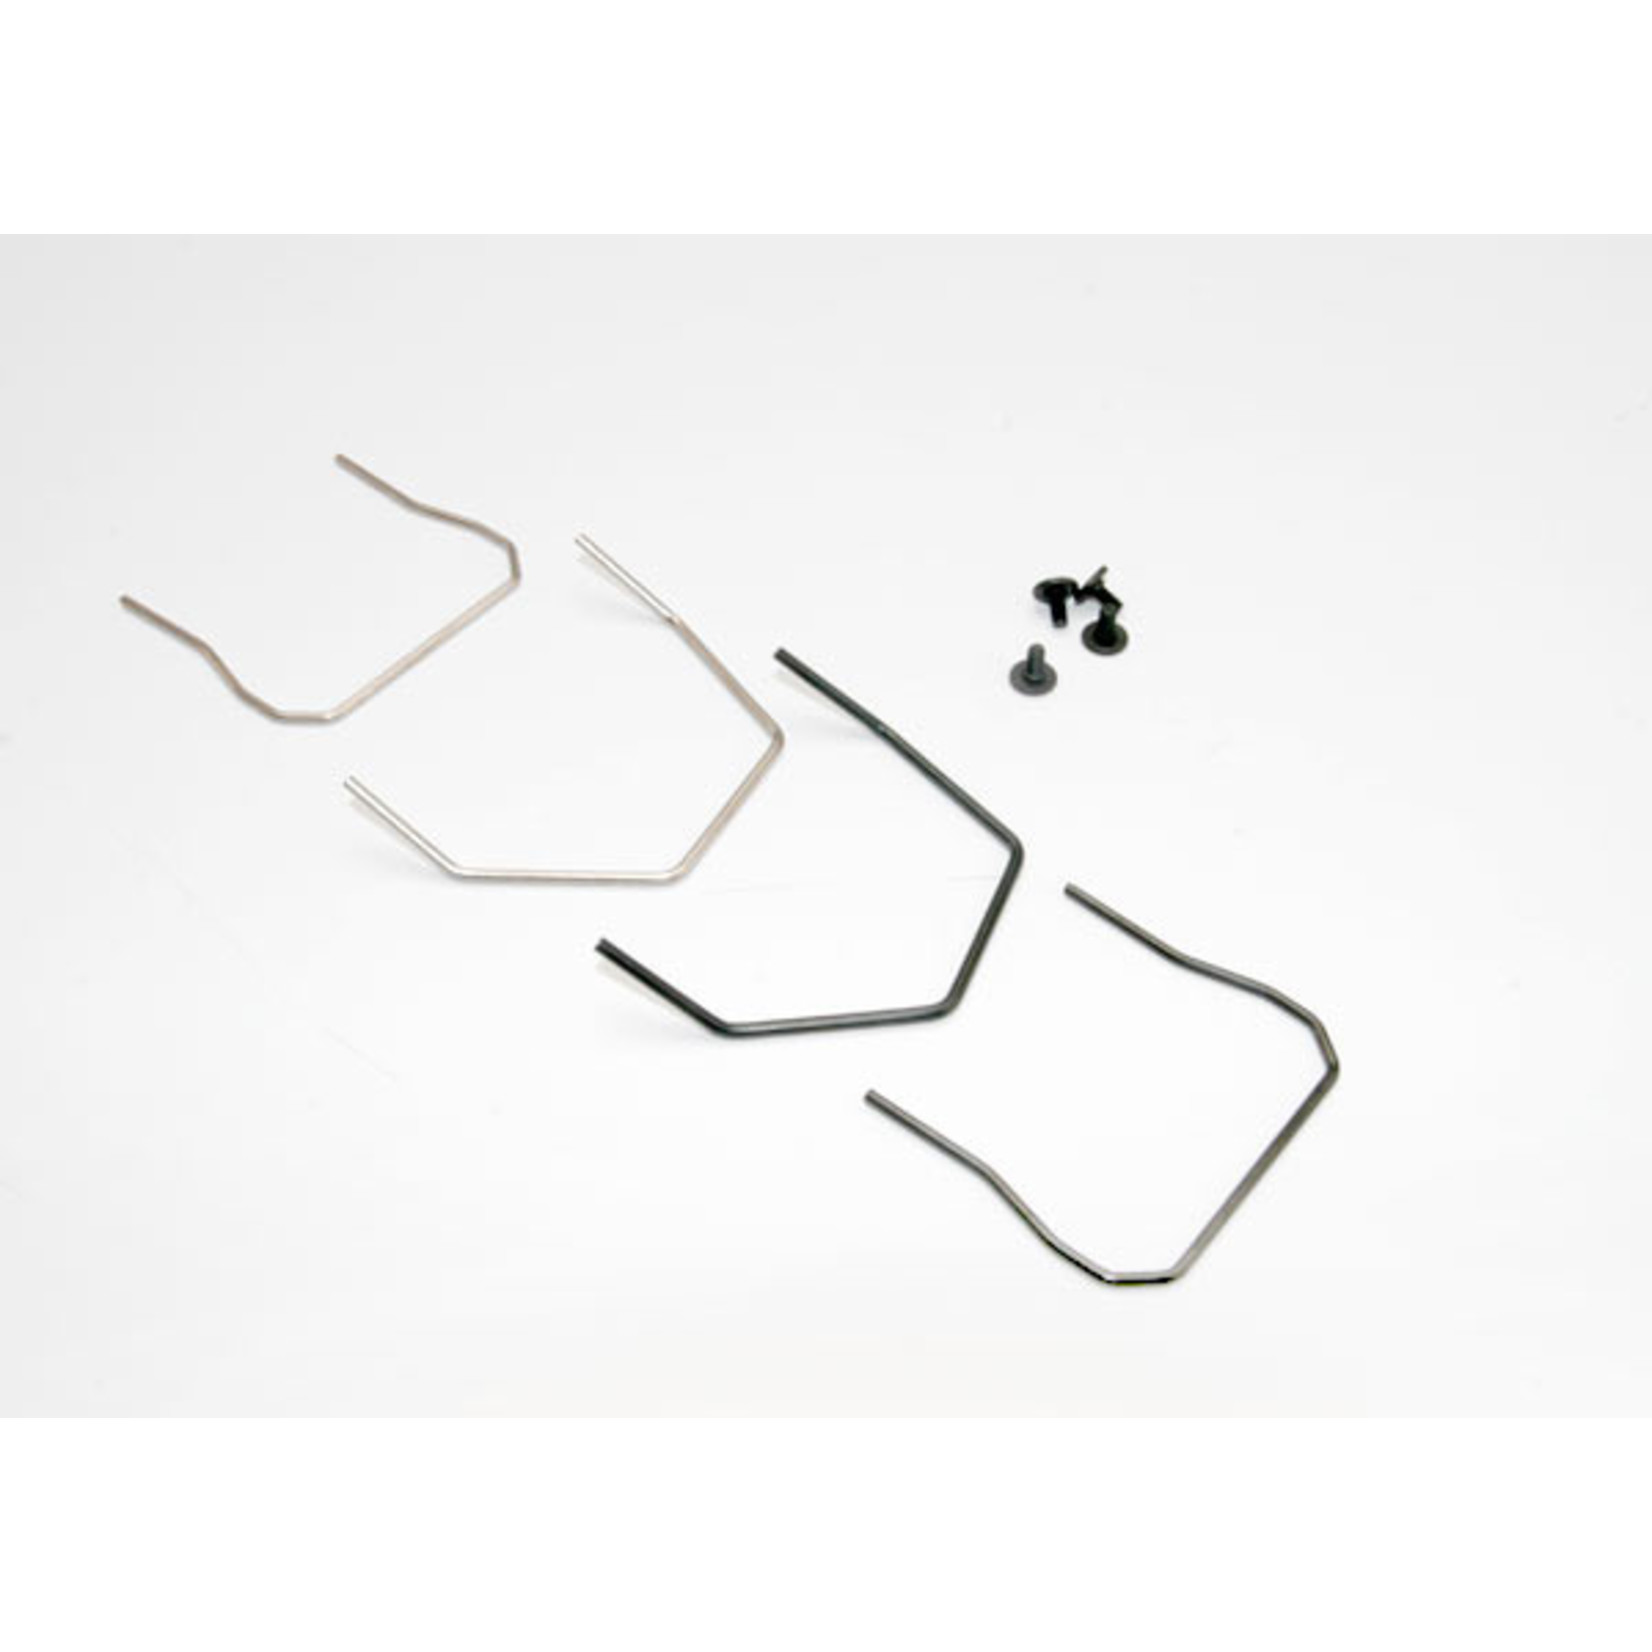 Traxxas 6896 - Wires, sway bar (front & rear, hard & soft)